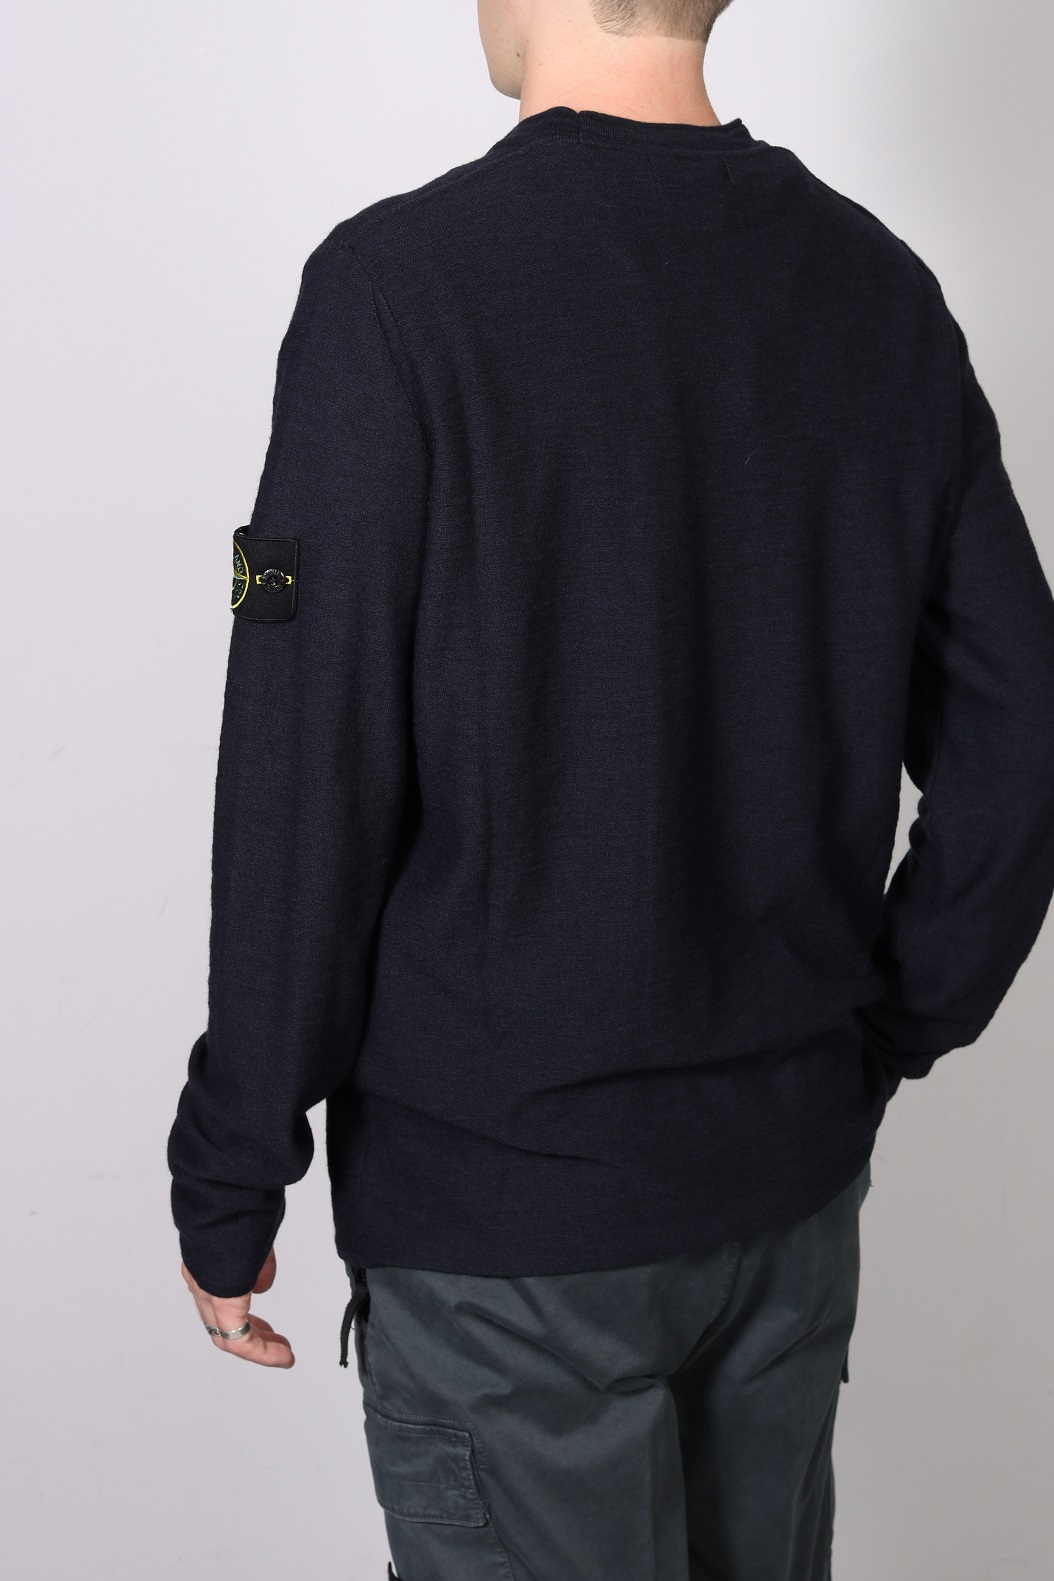 STONE ISLAND Knit Pullover in Navy Blue 3XL